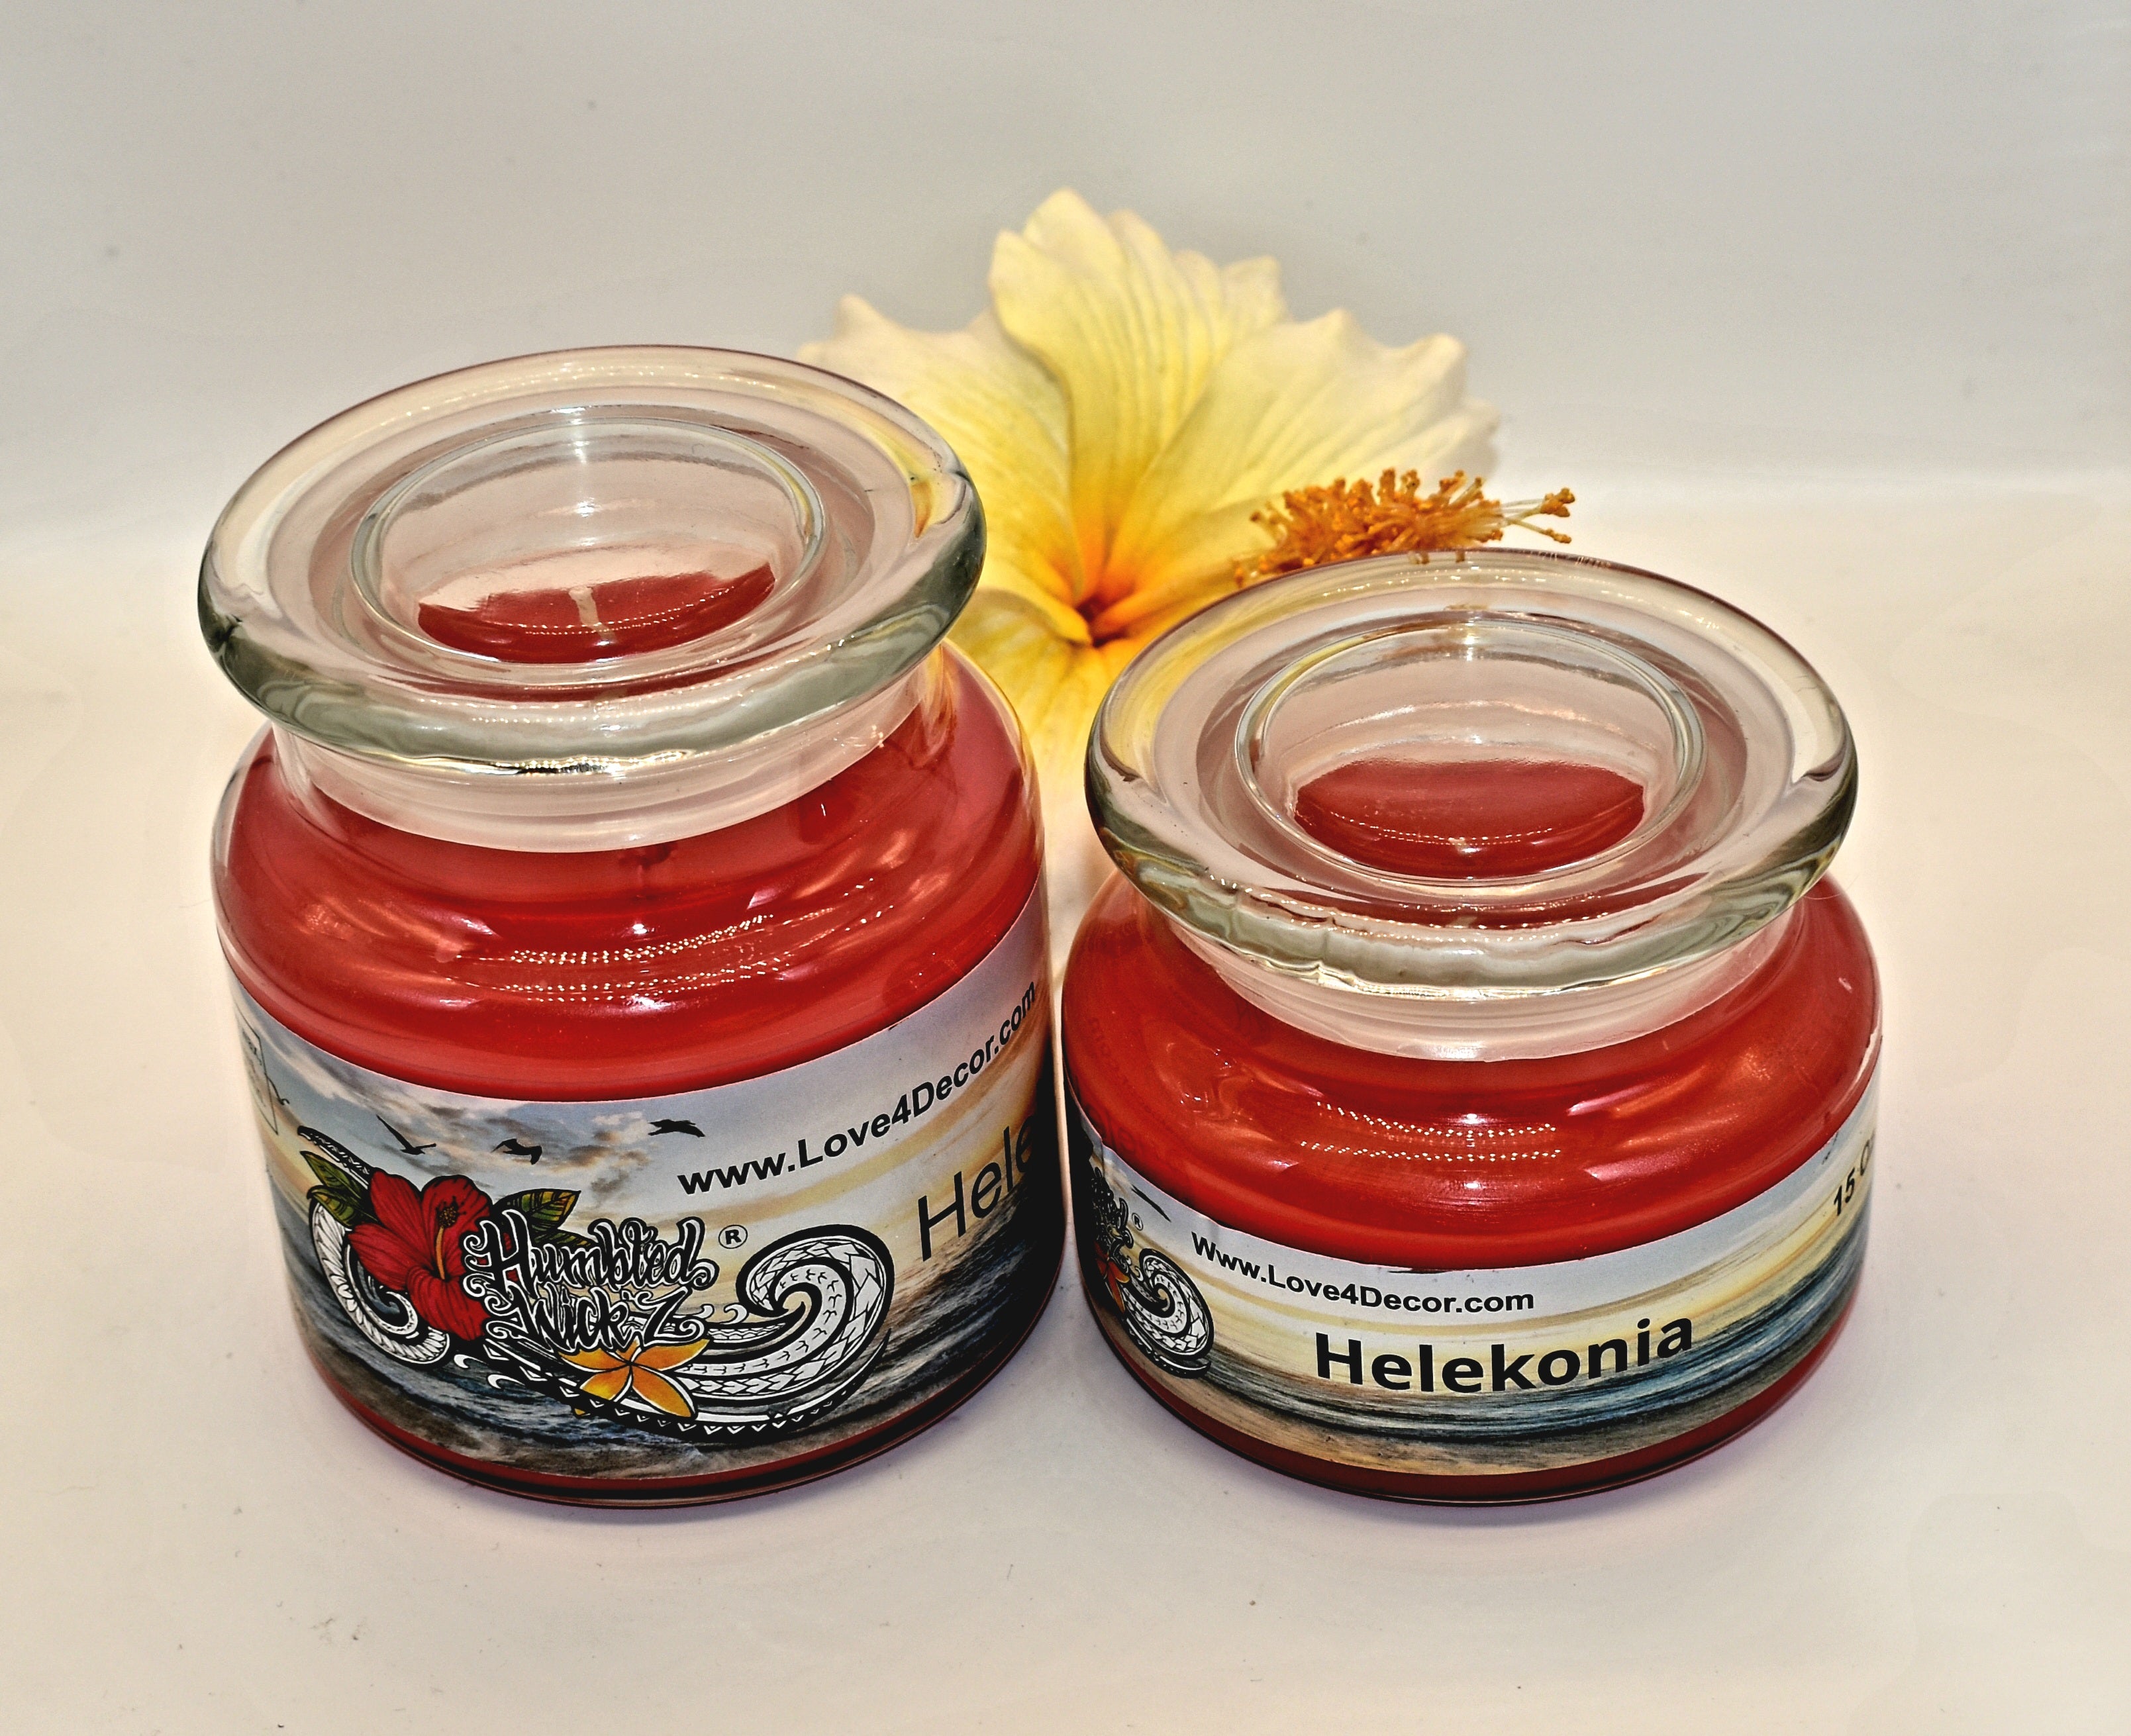 The Helekonia Scent